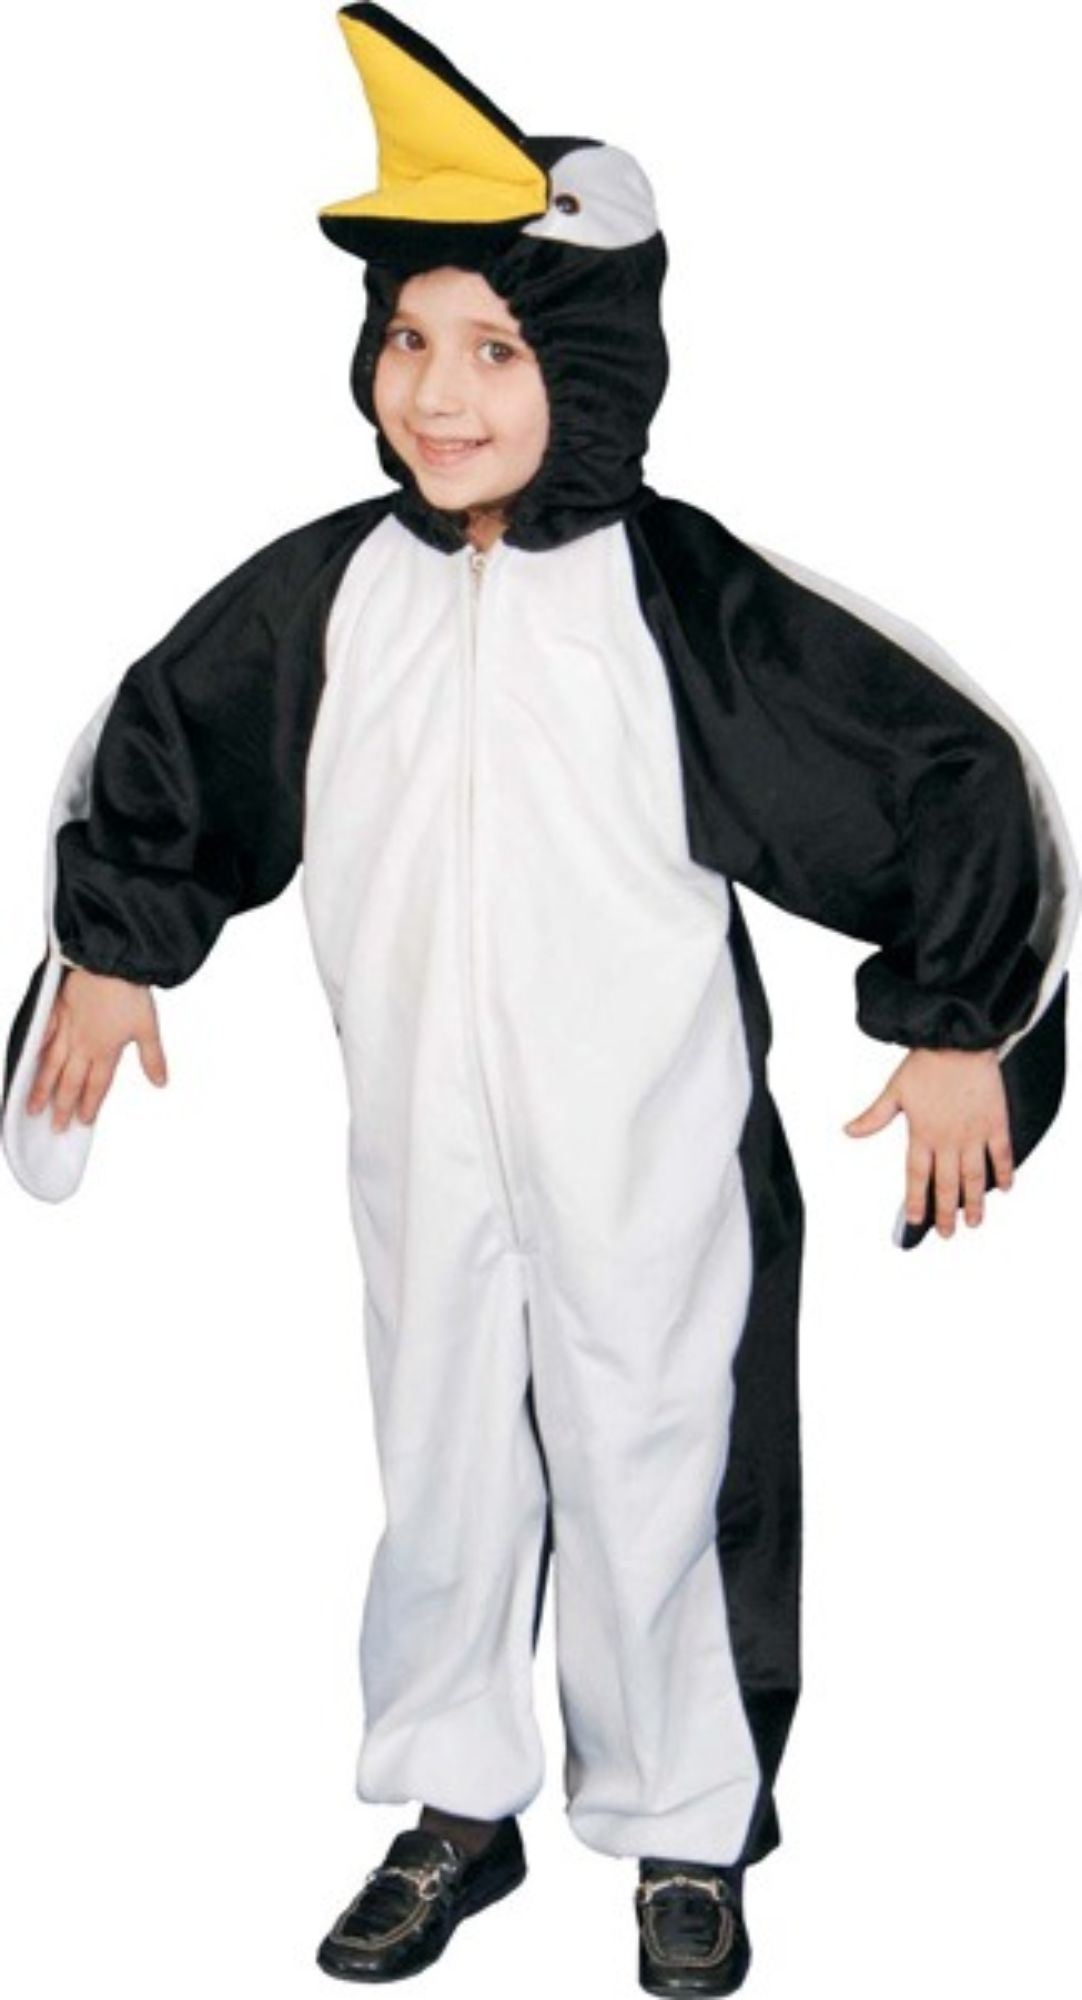 The Costume Center White and Black Penguin Toddler Halloween Costume - Large